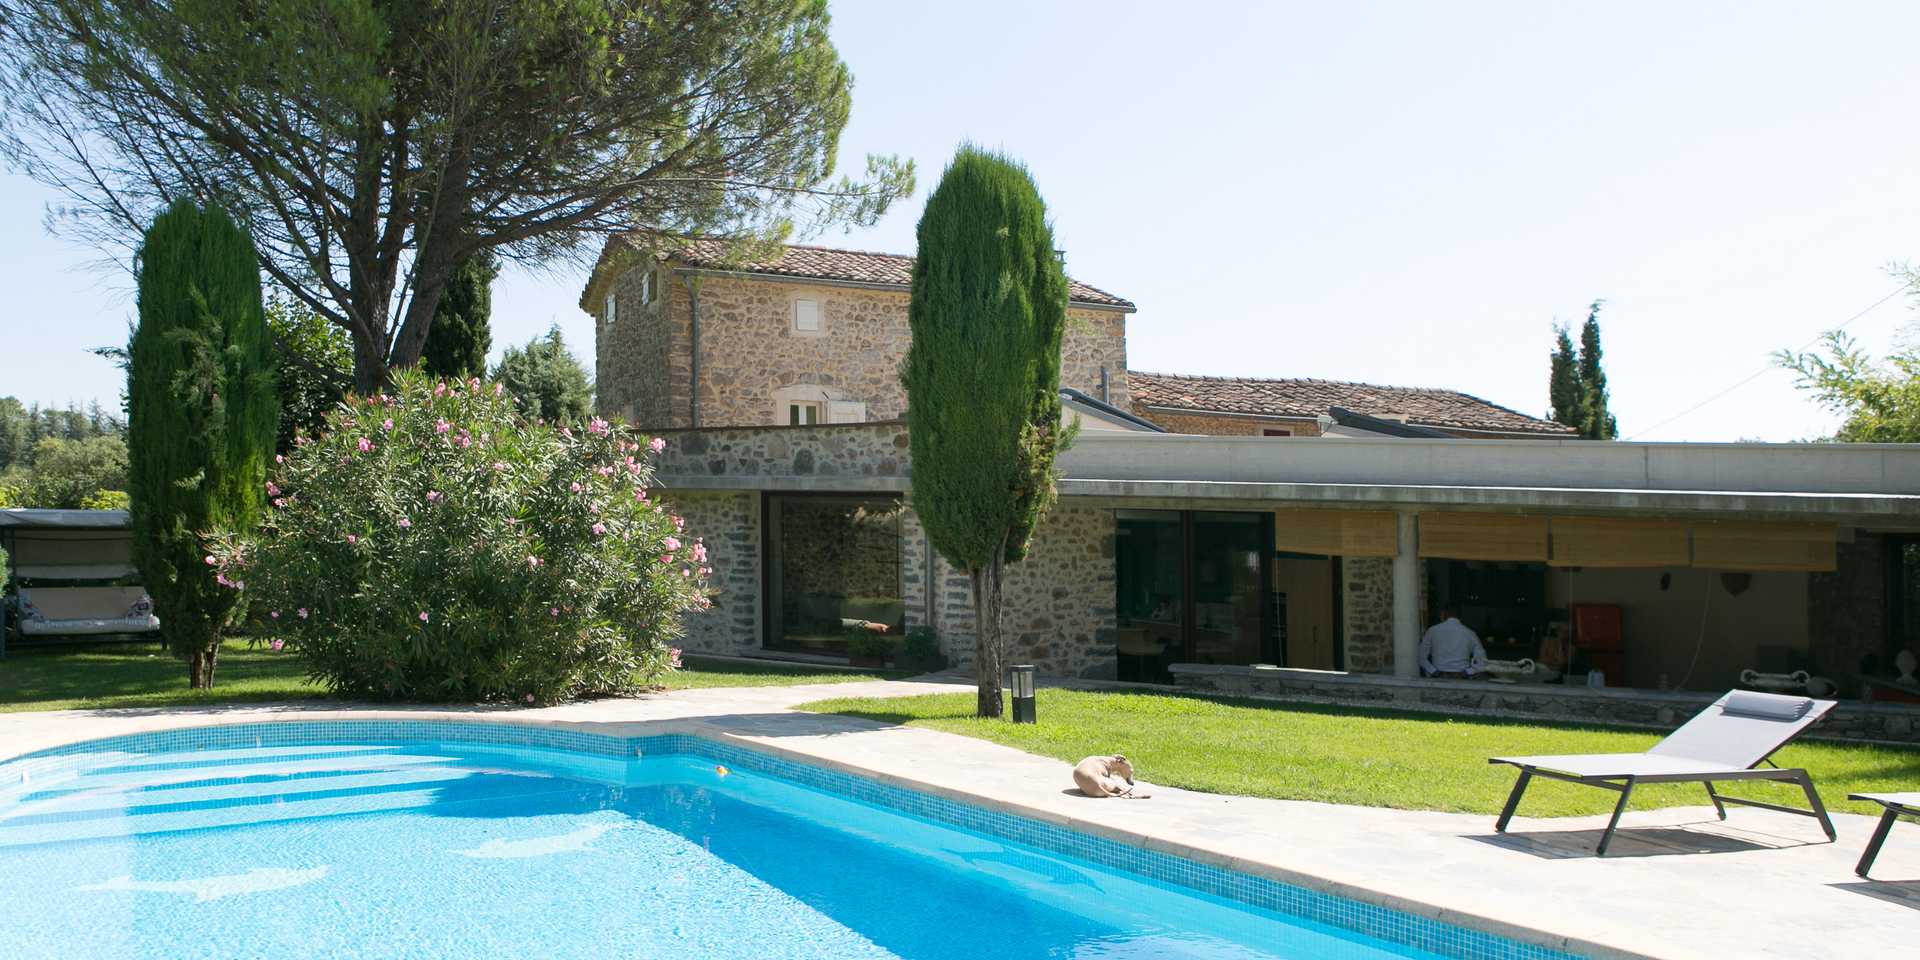 Renovation of a Provencal farmhouse with swimming pool by an architect from Aix-en-Provence